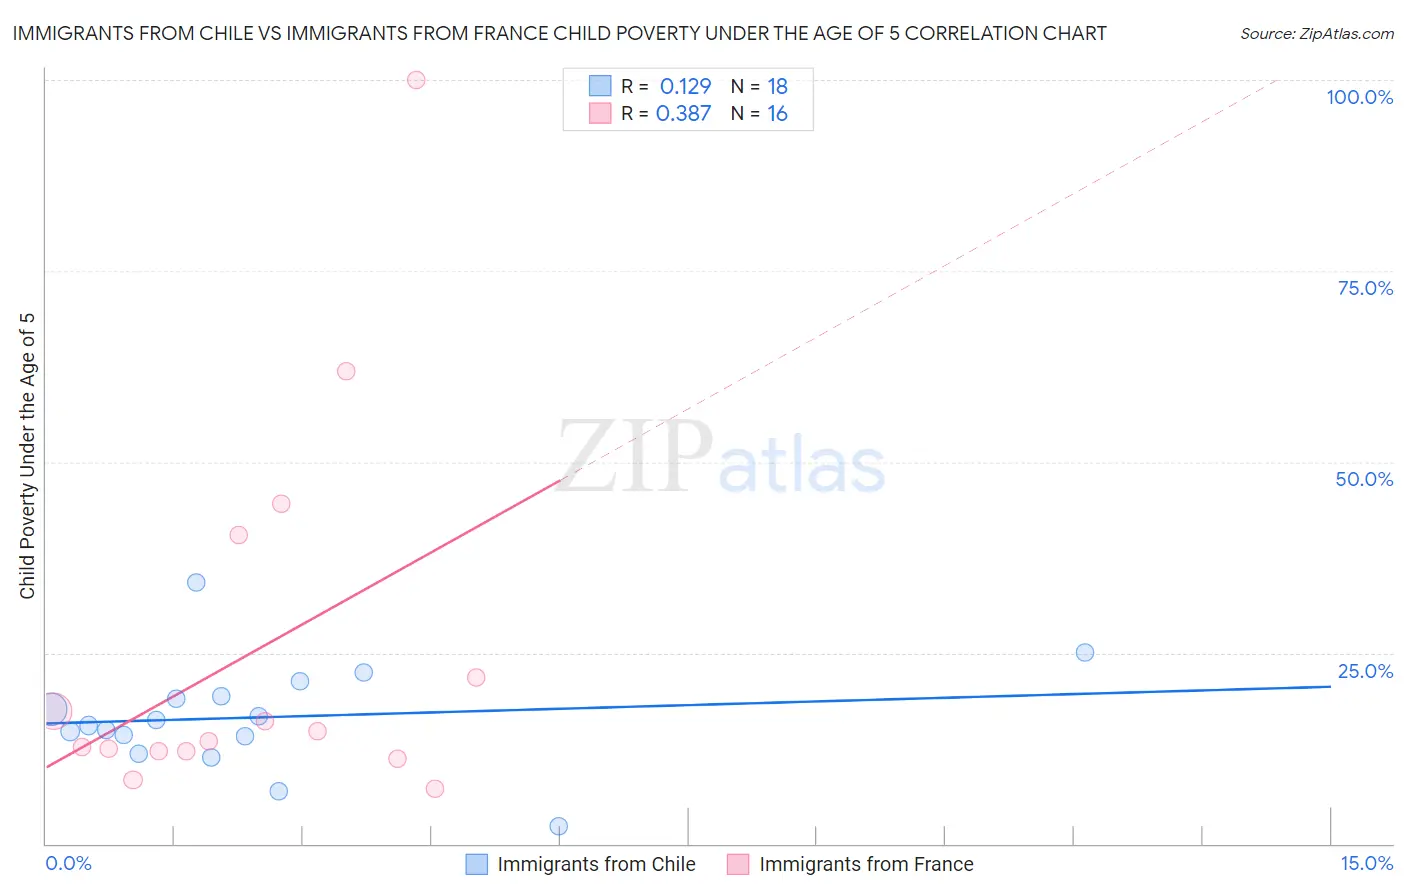 Immigrants from Chile vs Immigrants from France Child Poverty Under the Age of 5